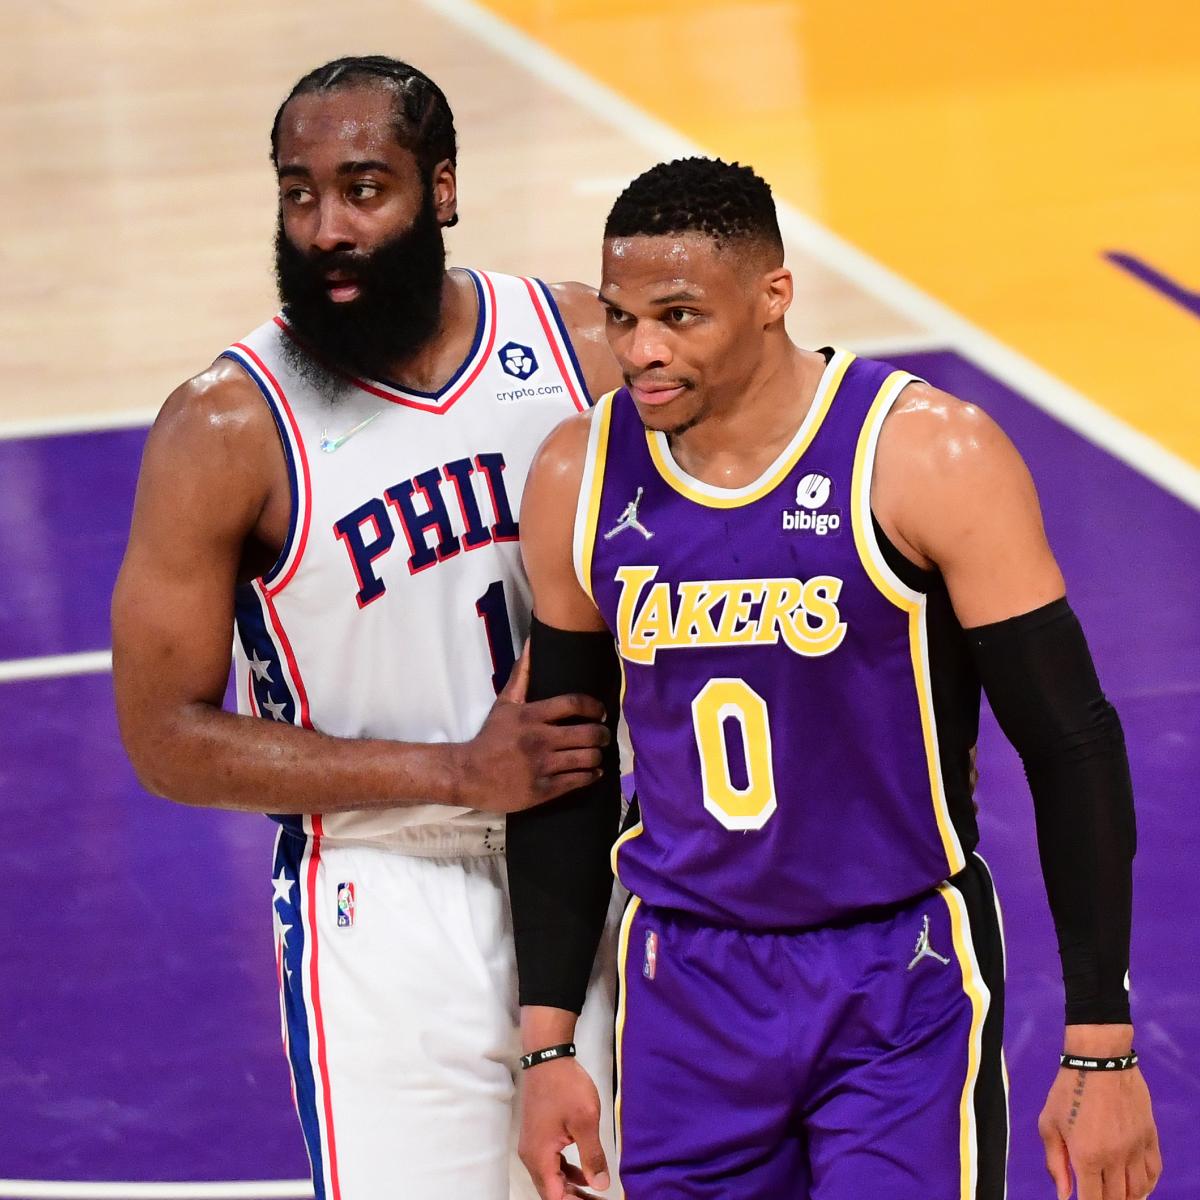 3 Things Every NBA Team Must Do During the 2022 Offseason